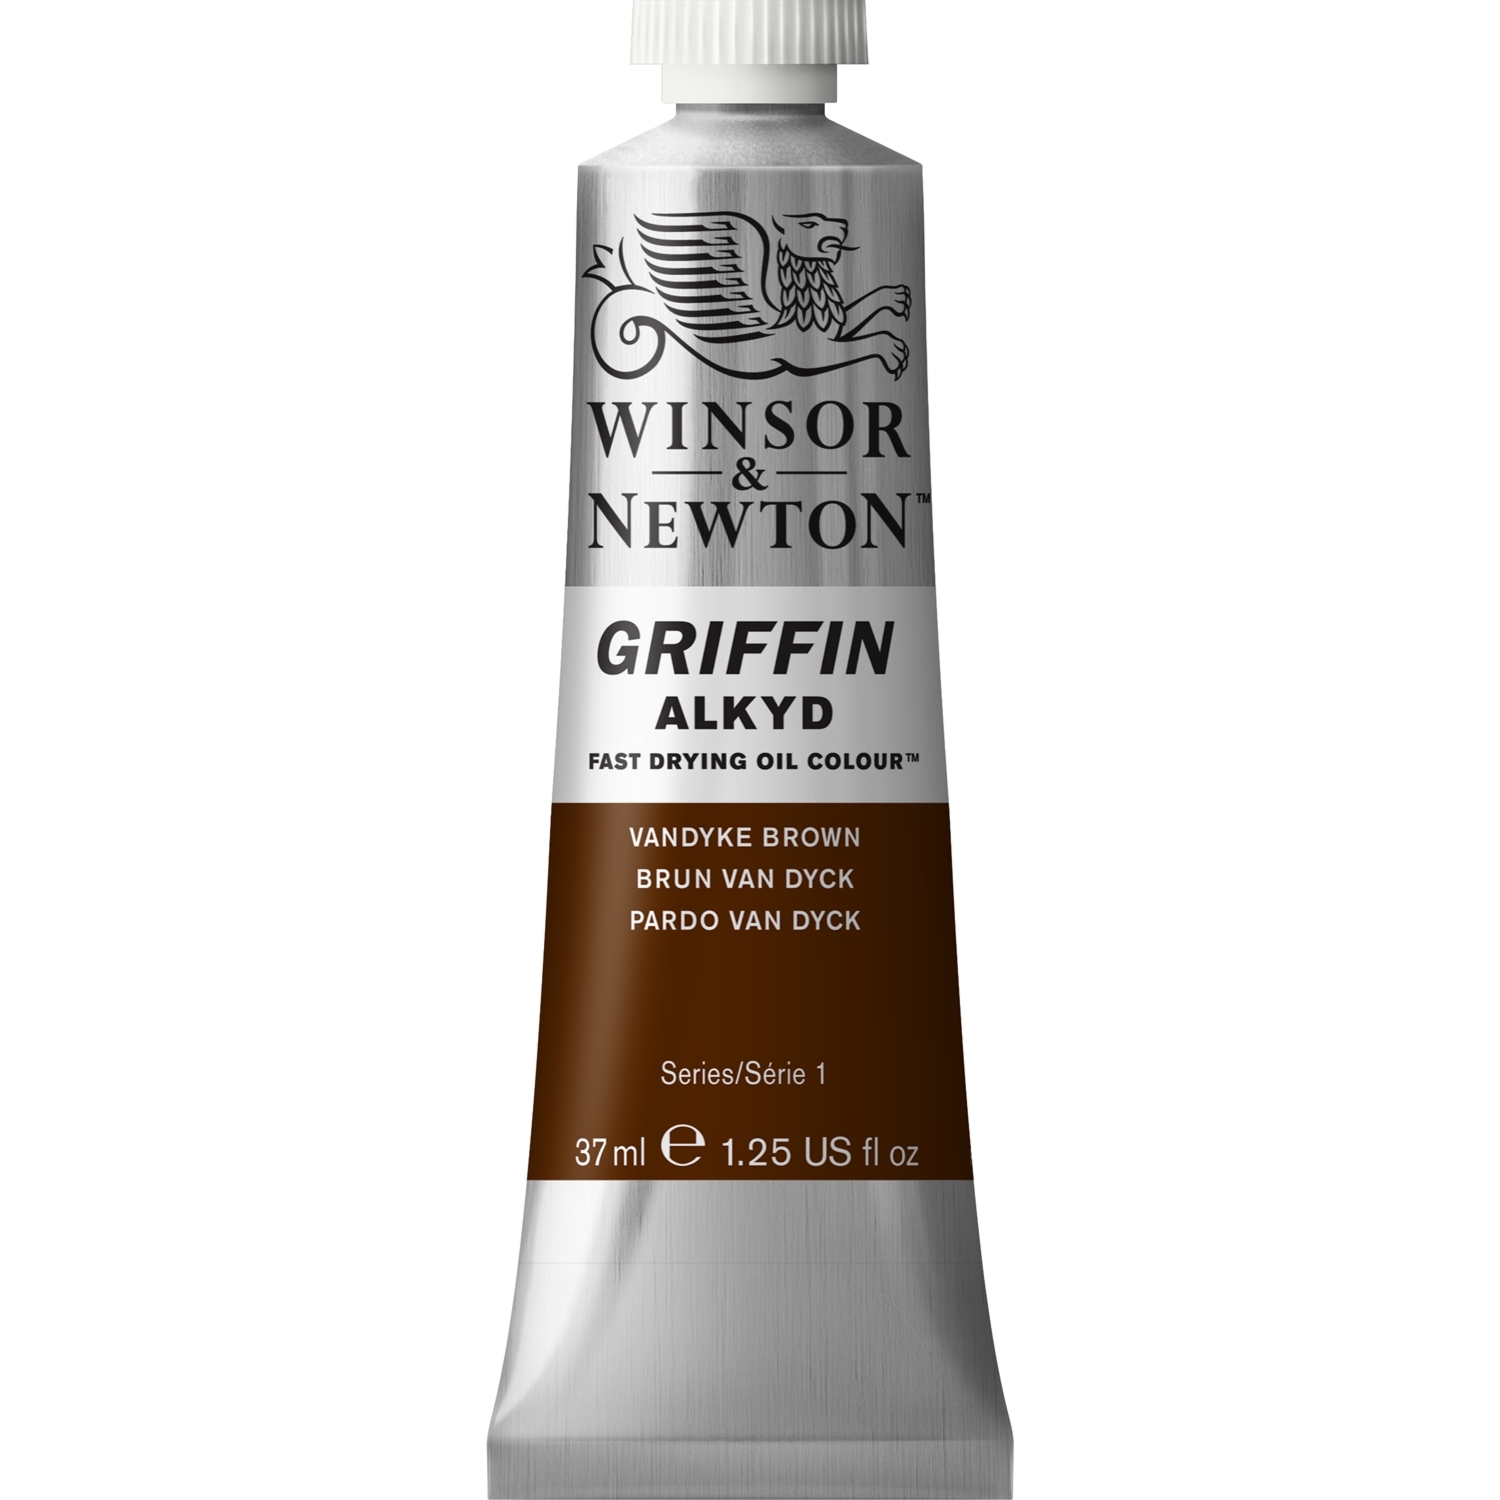 Winsor and Newton Griffin Alkyd Oil Colour - Vandyke Brown Image 1